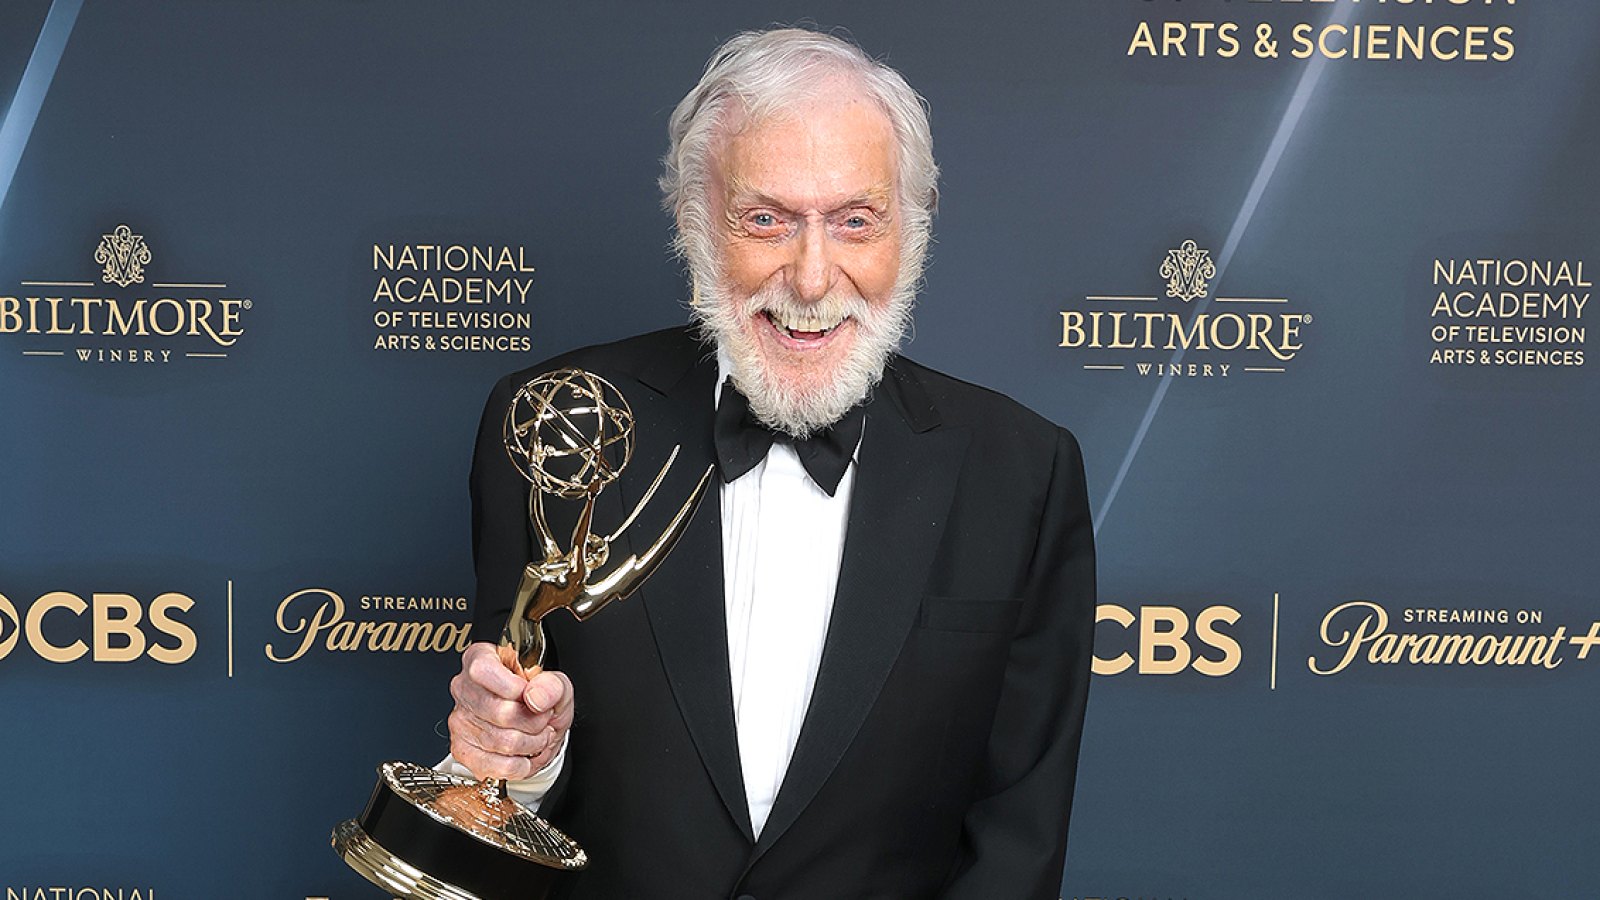 Dick Van Dyke, 98, Is the Oldest Daytime Emmy Winner for 'Days of Our Lives' Guest Appearance